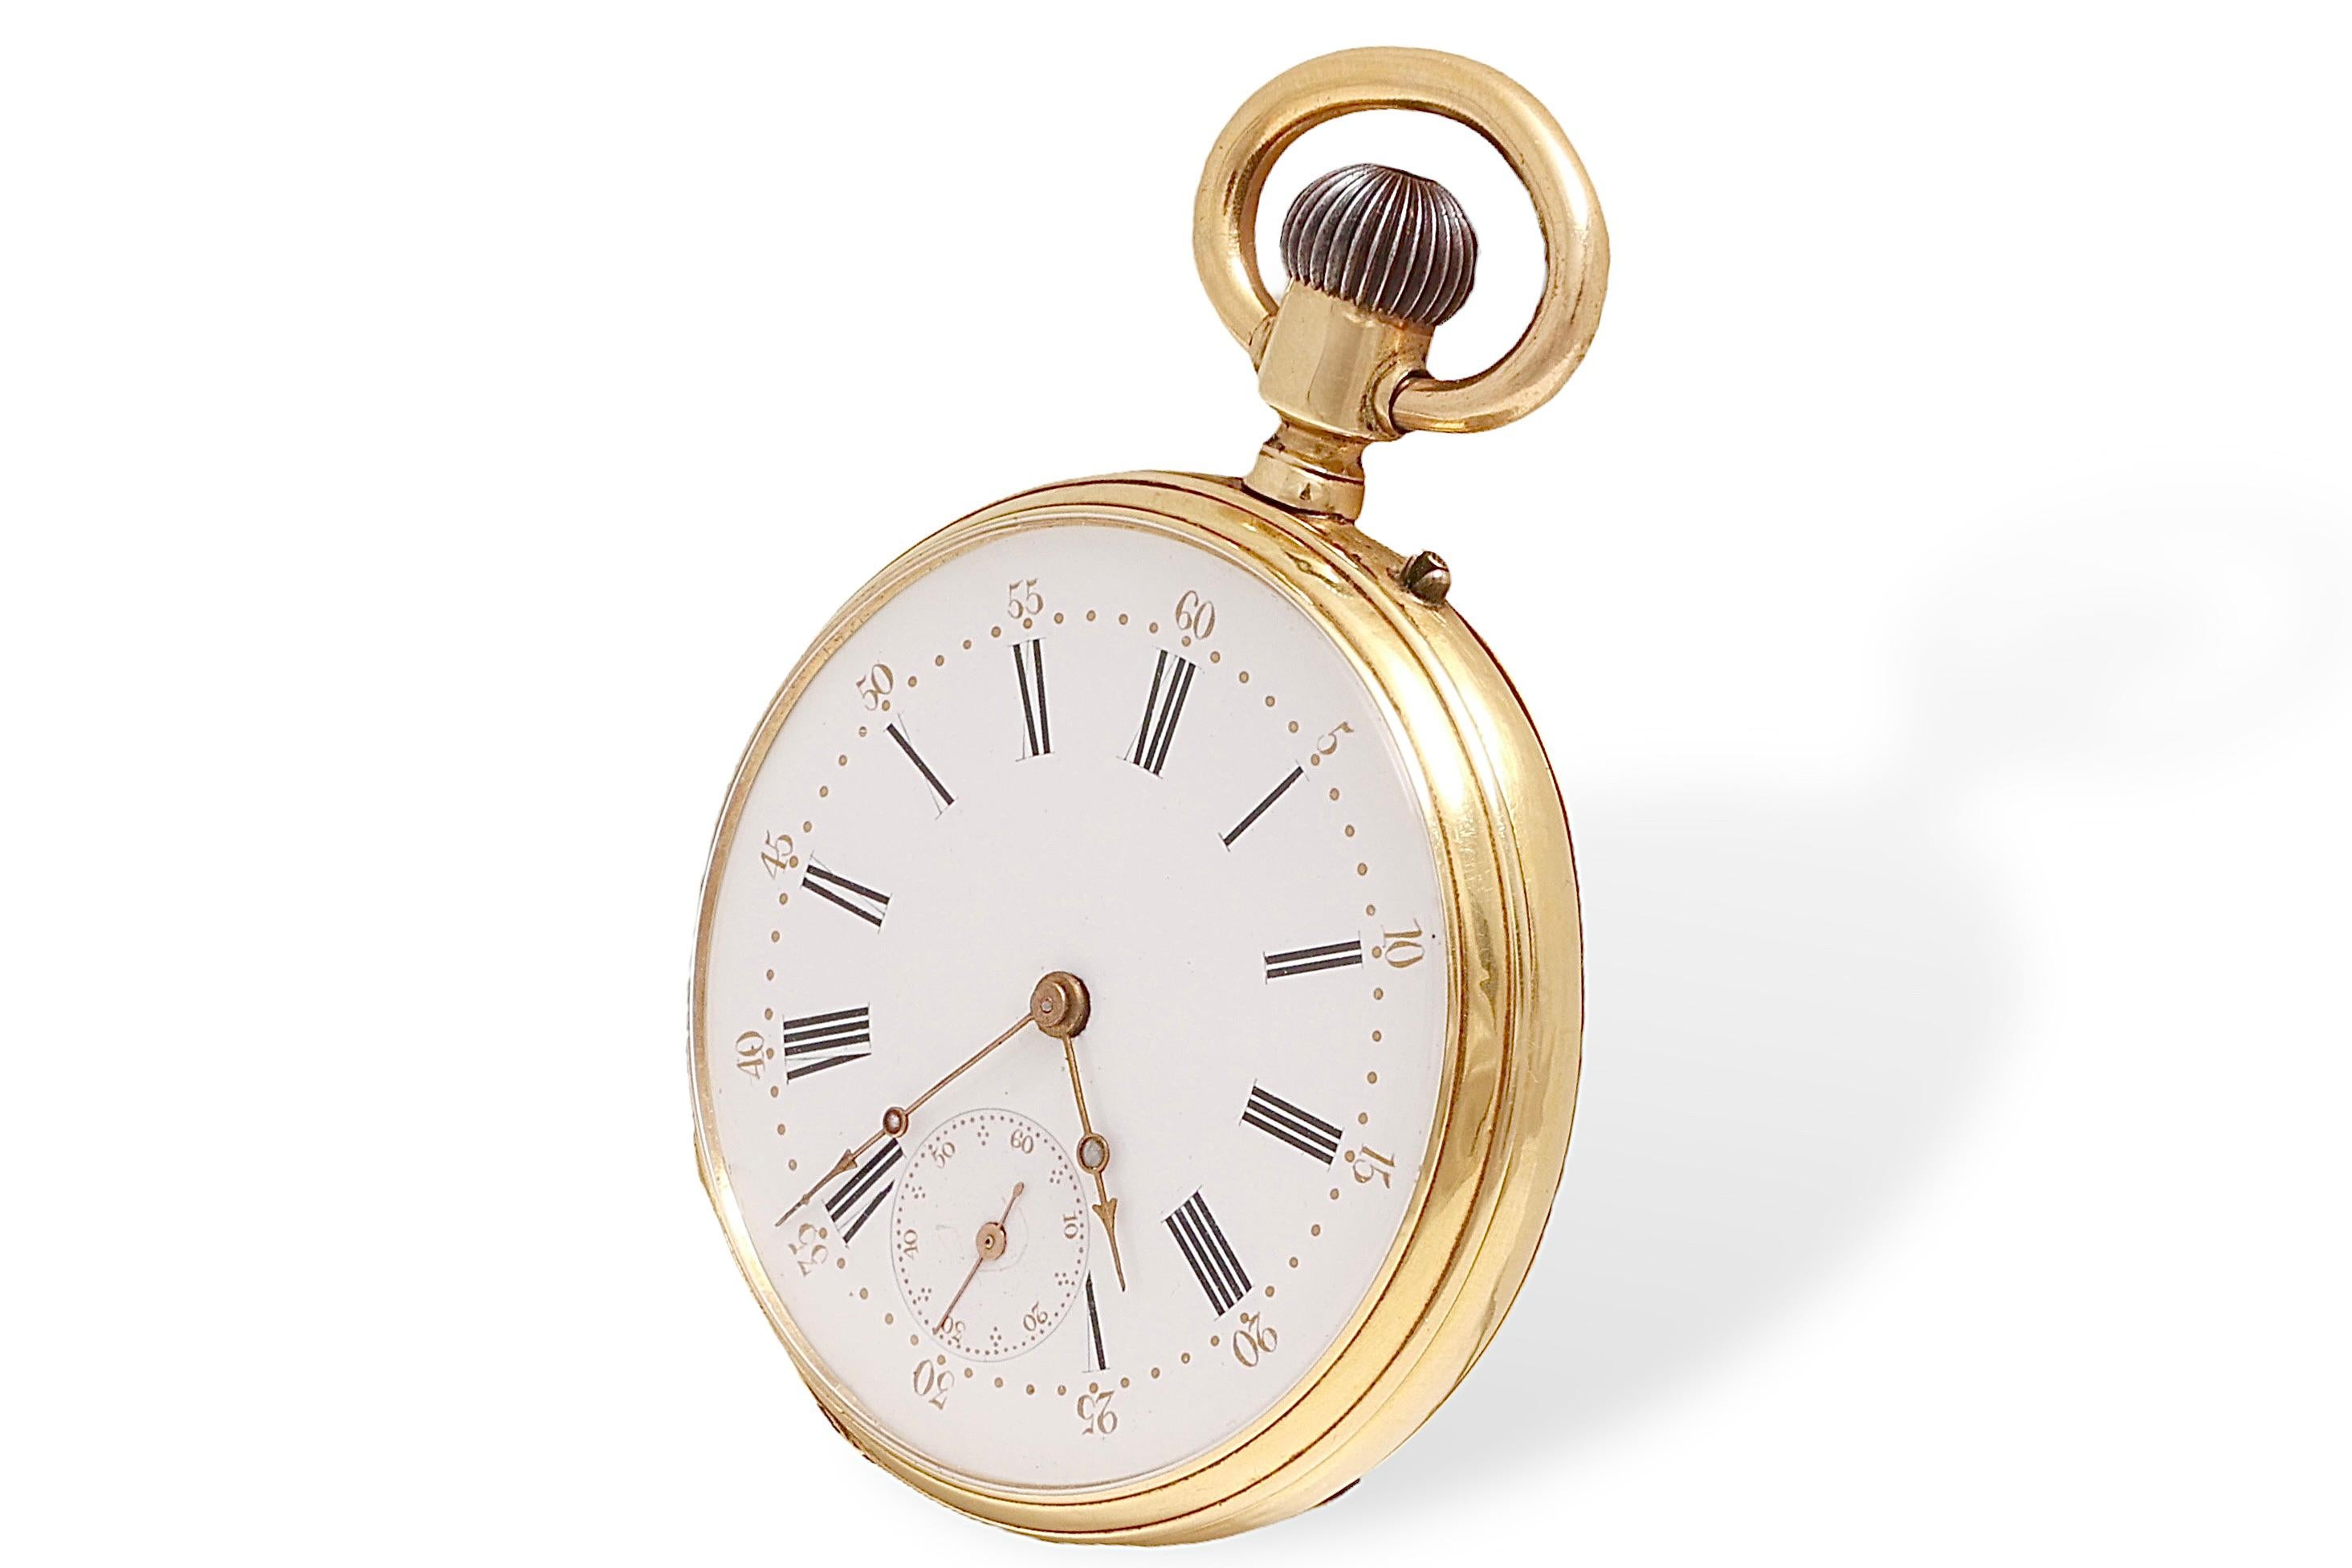 18 Kt Solid Gold Pateck Geneve Spiral Breguet Open Face Pocket Watch

Dial: White Enamel dial with black Roman numerals ,2 Rose Cut Diamonds in hour & minute hands

Case: Measurements: Diameter 47.5, Thickness 13.5 mm

Total weight: 73.5 gram /